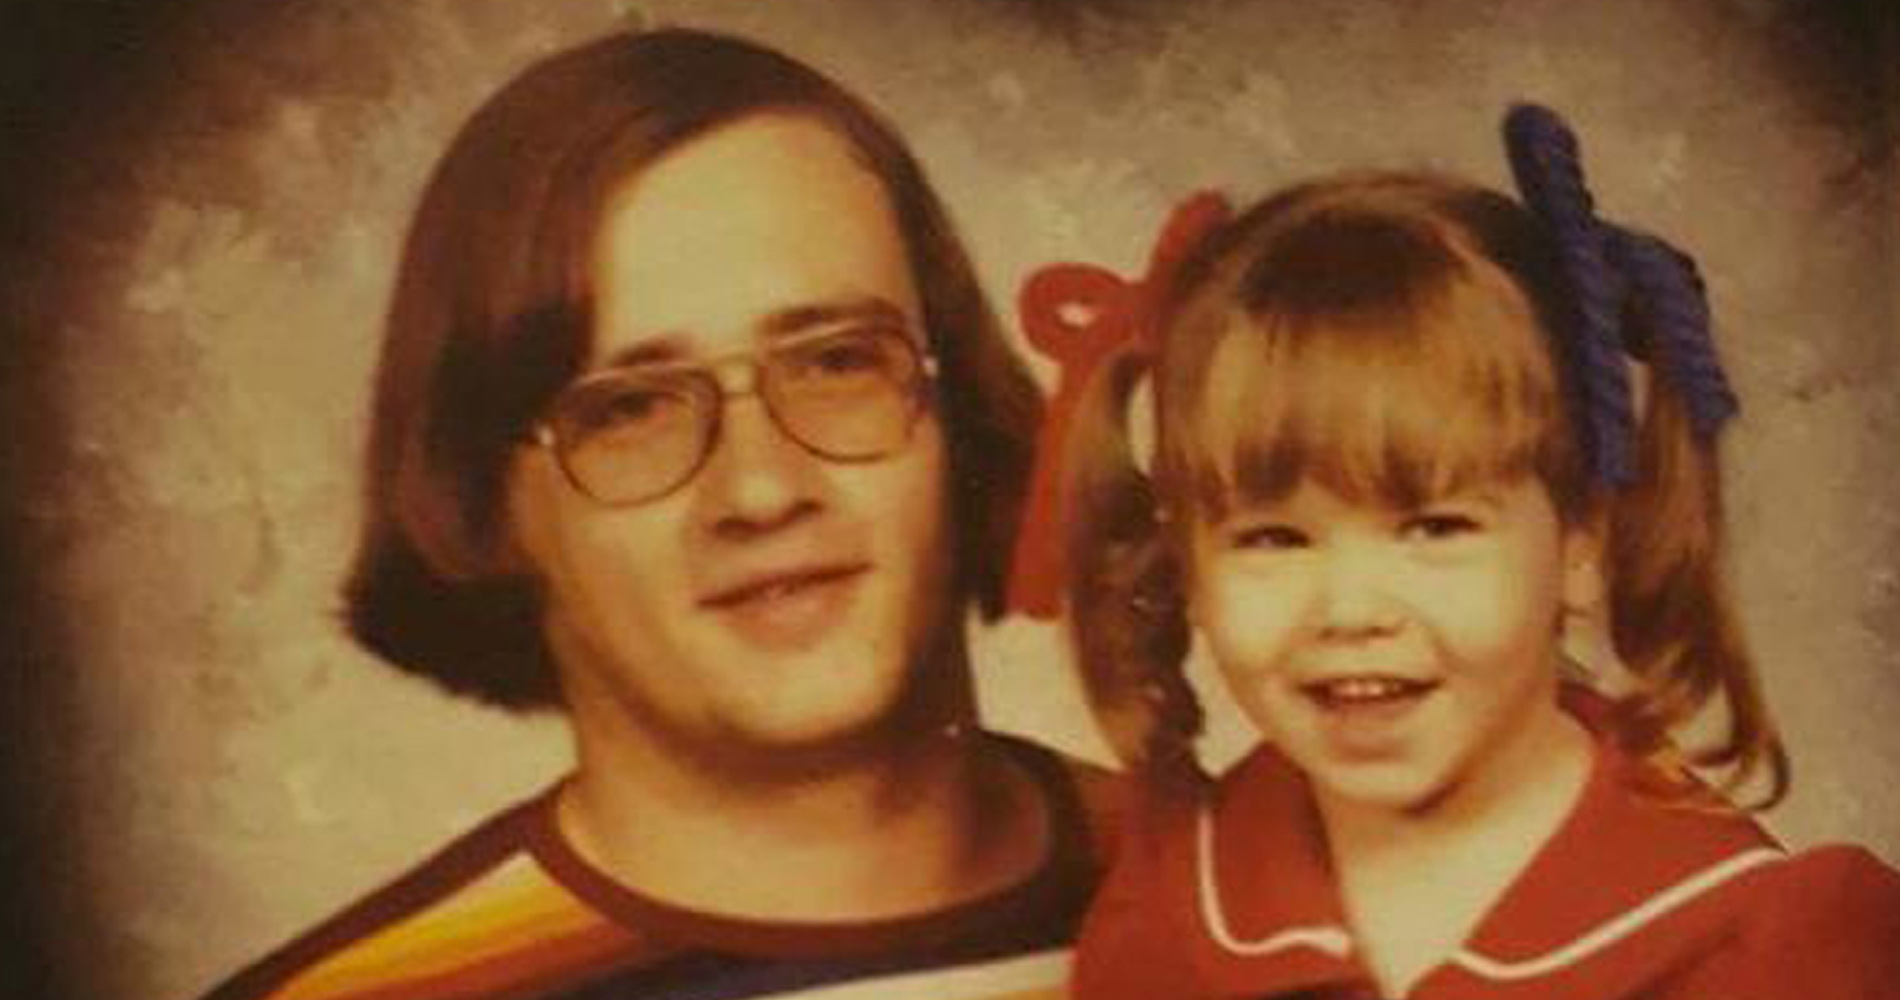 10 Key Facts About Sedley Alley, Denied DNA Testing Before Execution